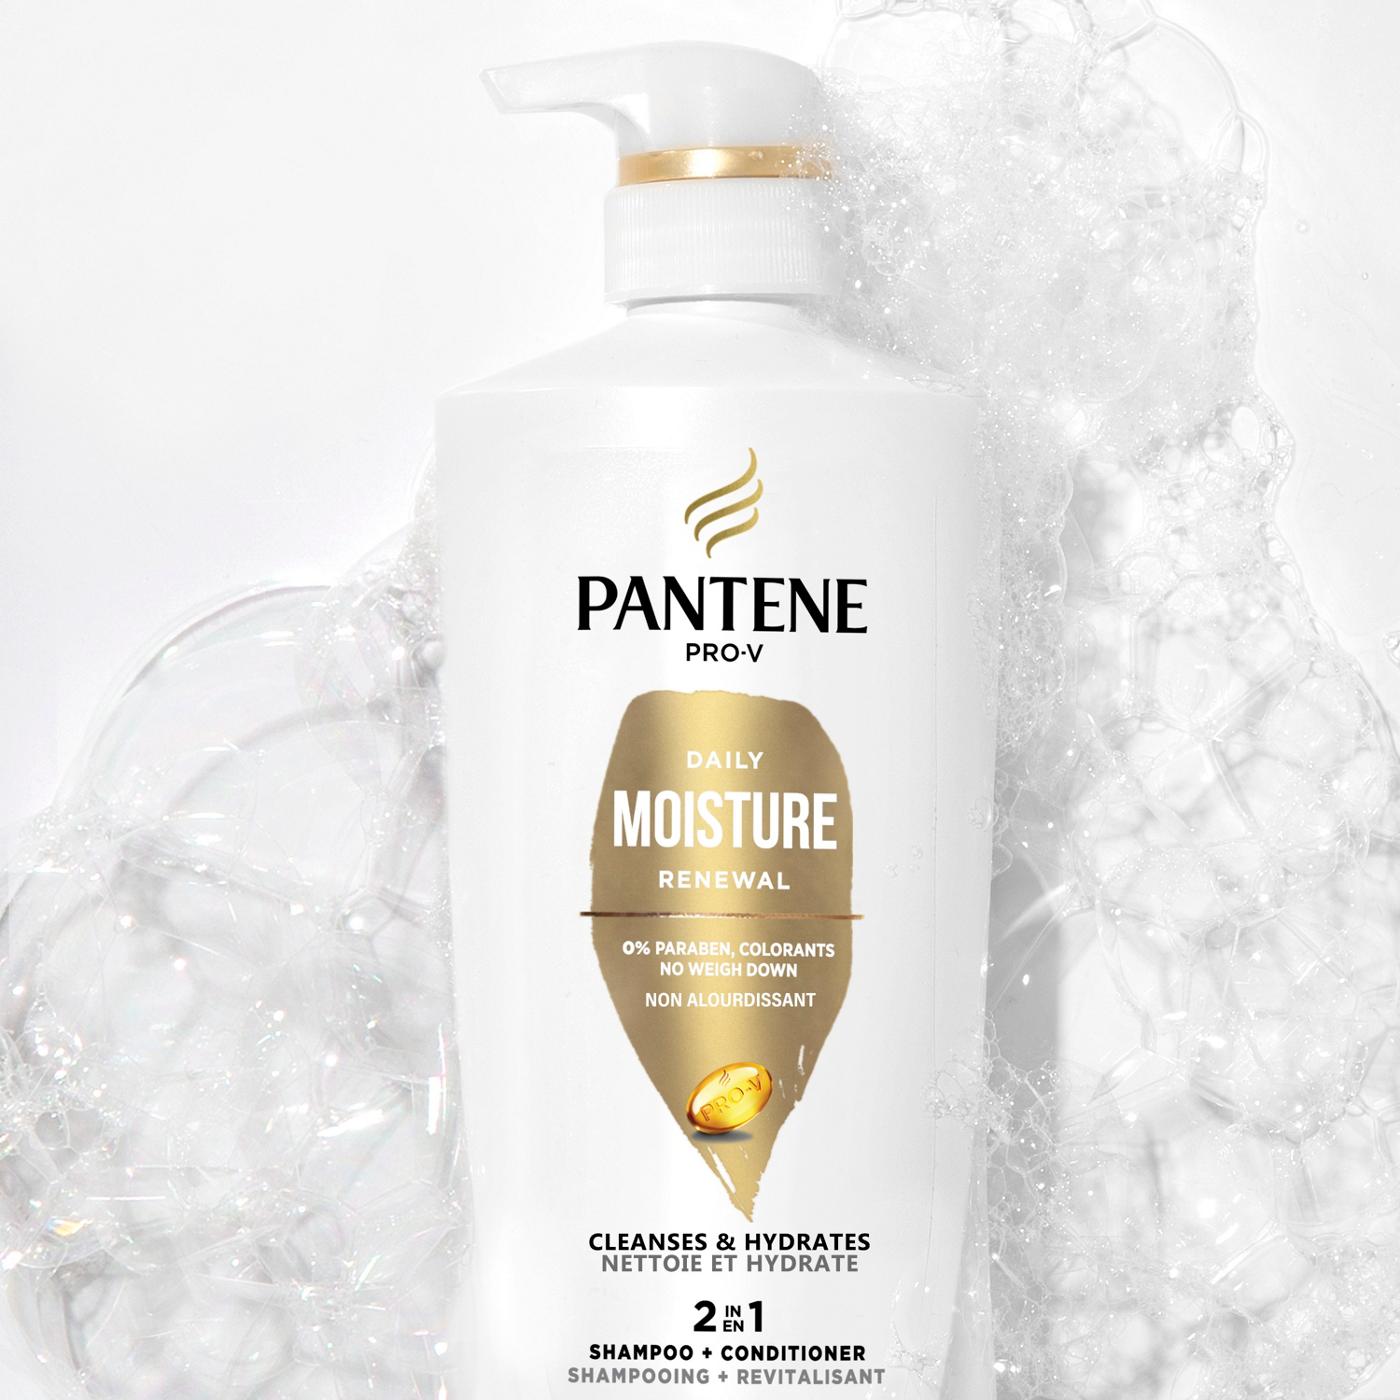 Pantene Pro-V Daily Moisture Renewal 2 in 1 Shampoo + Conditioner; image 5 of 8